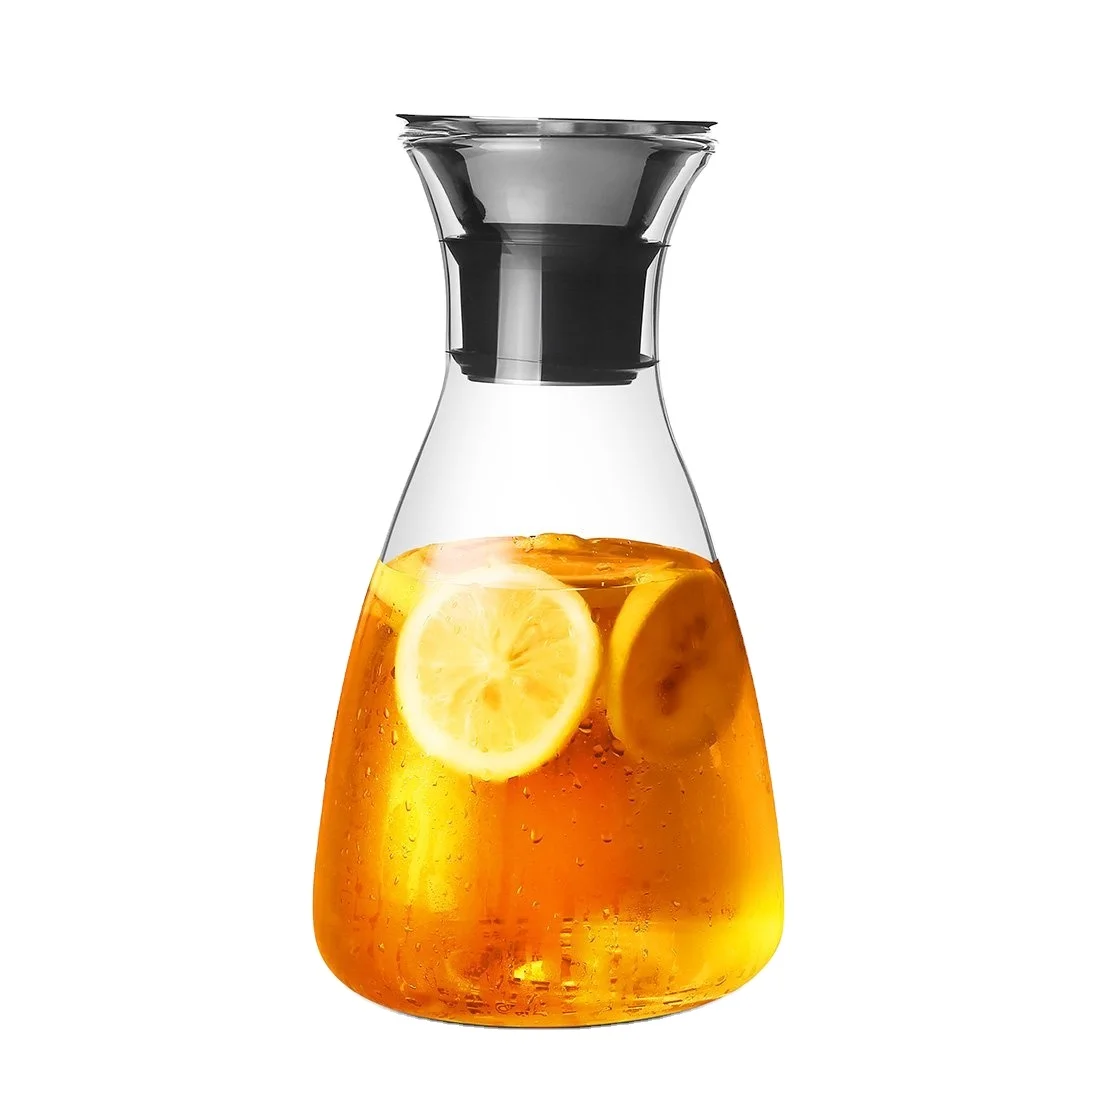 

Wholesale 50 Oz / 1.5 LGlass Water Carafe and Drink Infuser with Stainless Steel Filter Lid Borosilicate Glass Iced Tea Pitcher, Transparent